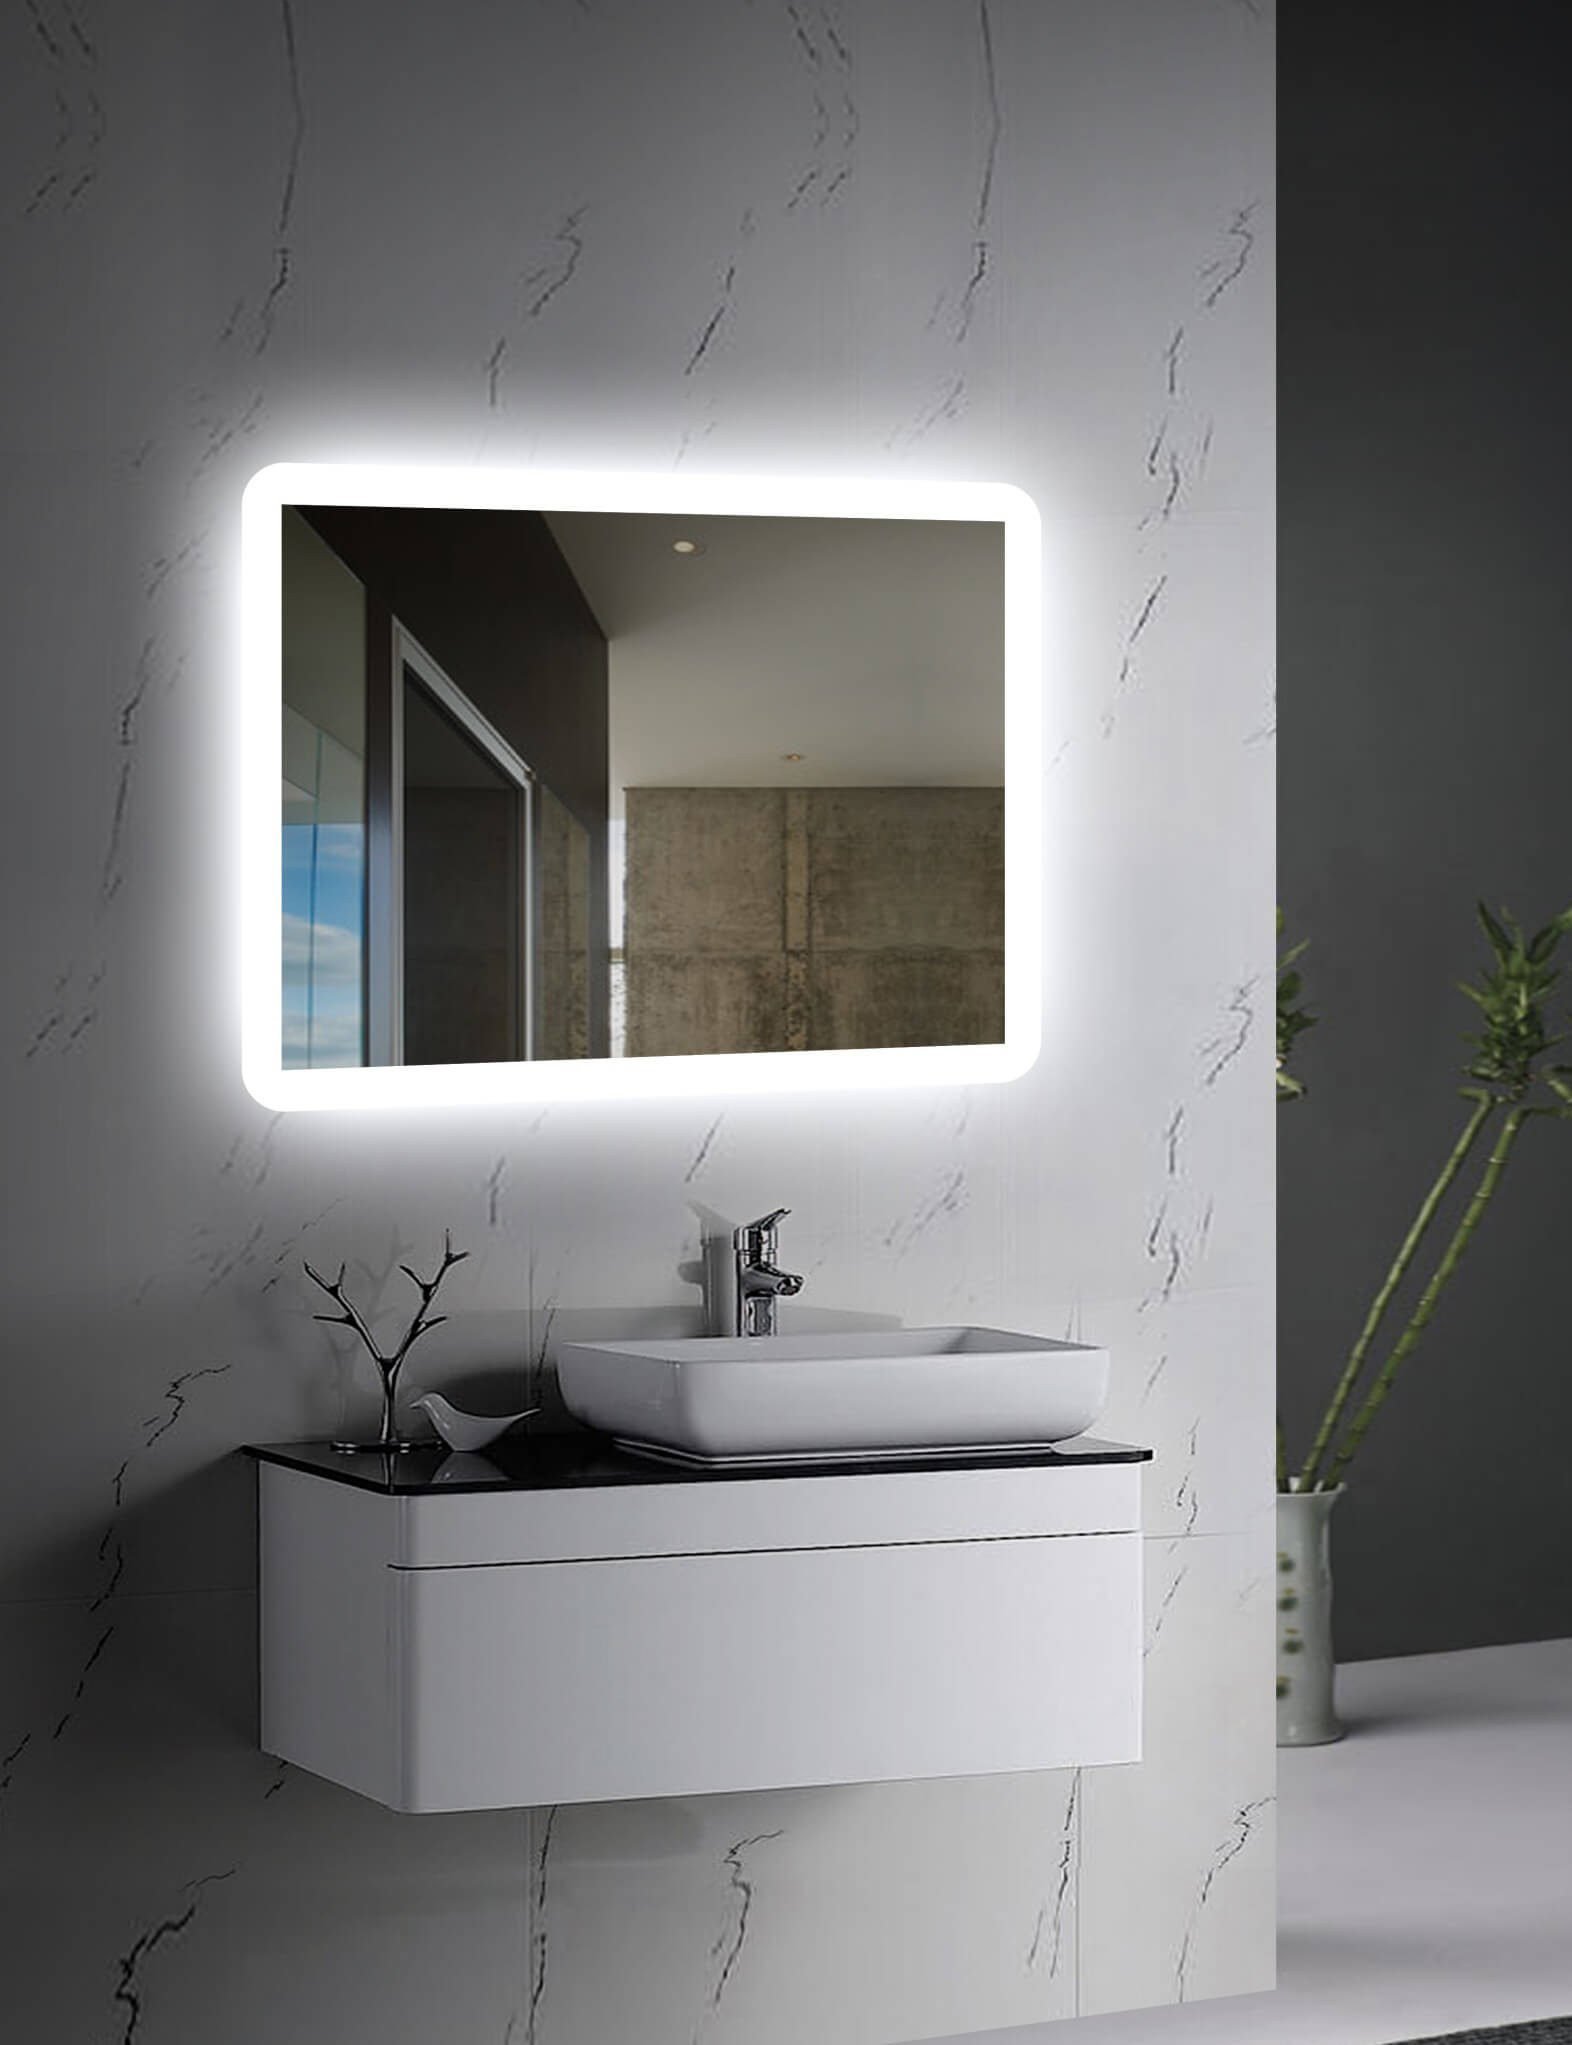 THE PERFECT LED MIRROR FOR YOUR HOME